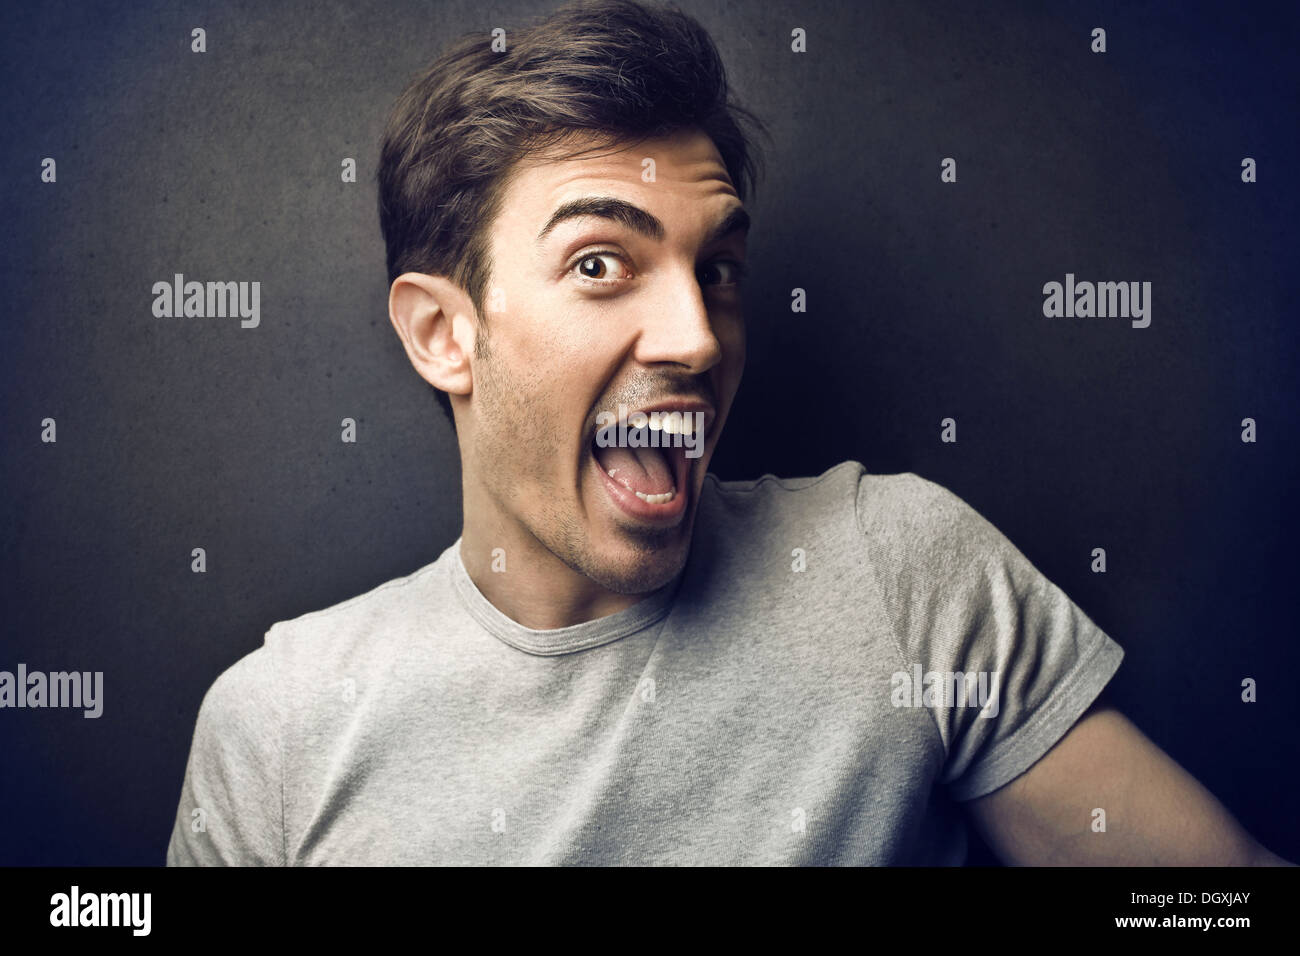 Happy boy screaming with a black background Stock Photo